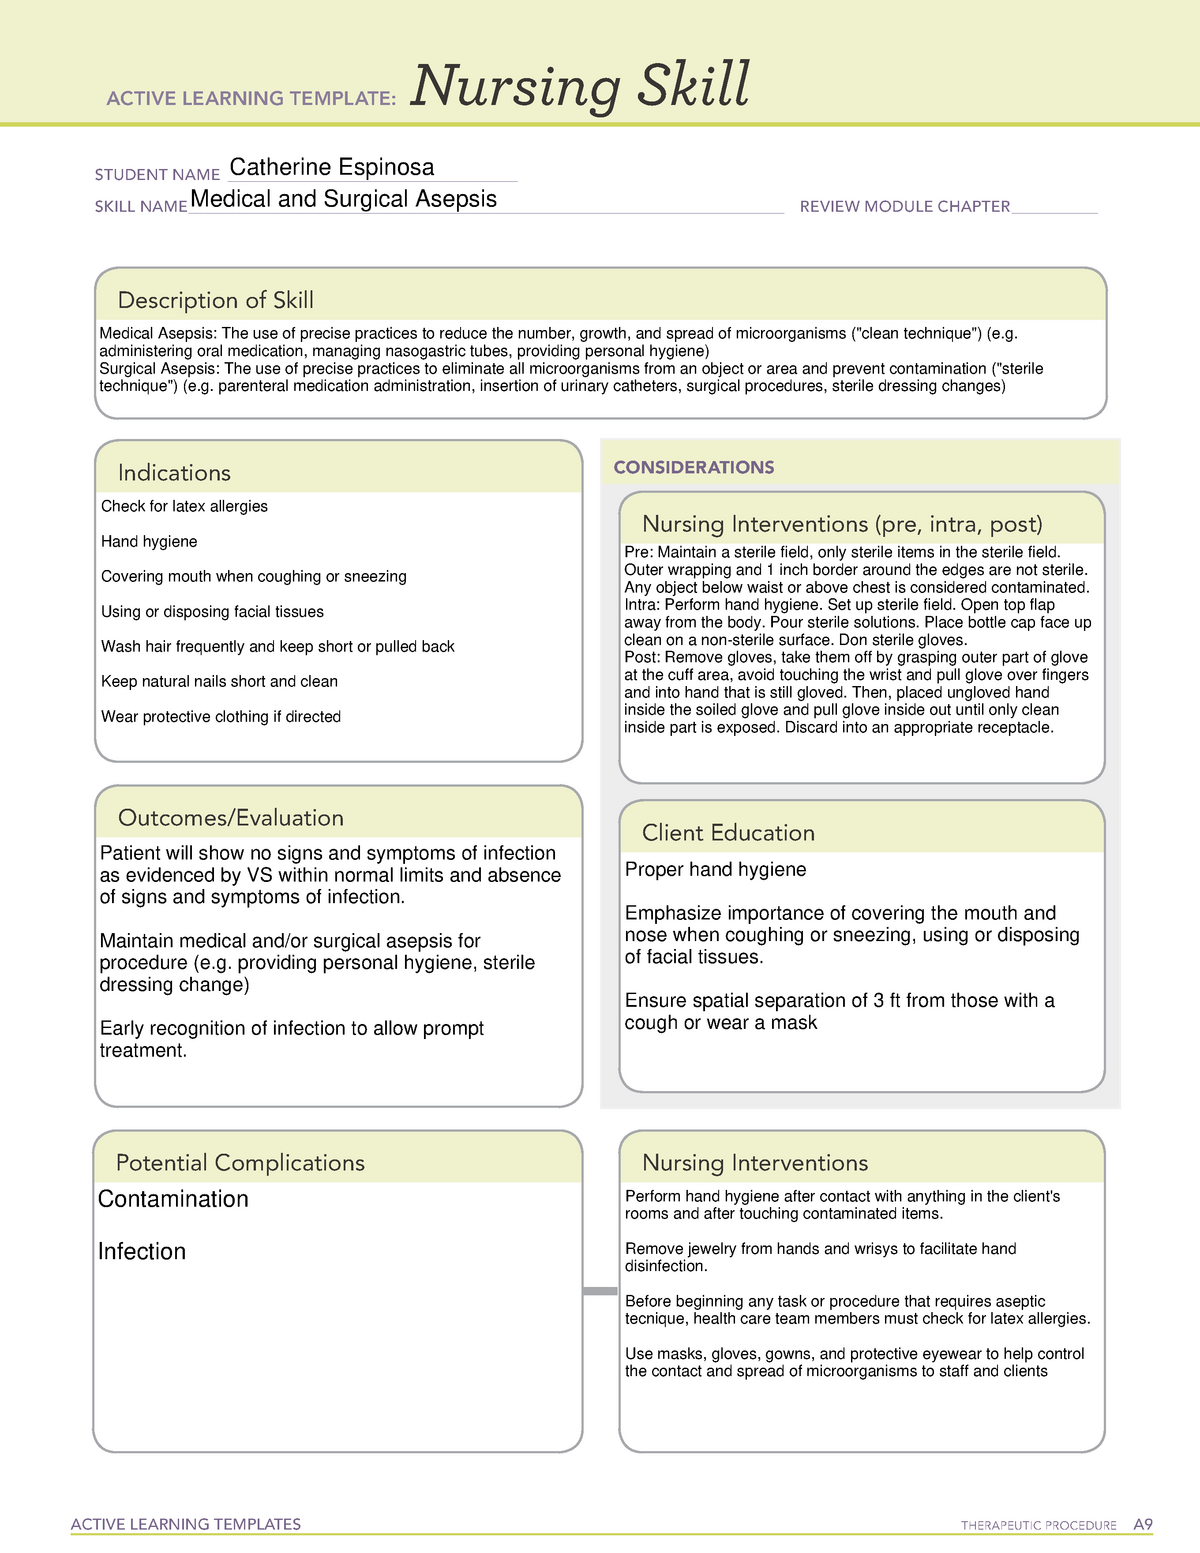 Medical and Surgical Asepsis ACTIVE LEARNING TEMPLATES THERAPEUTIC